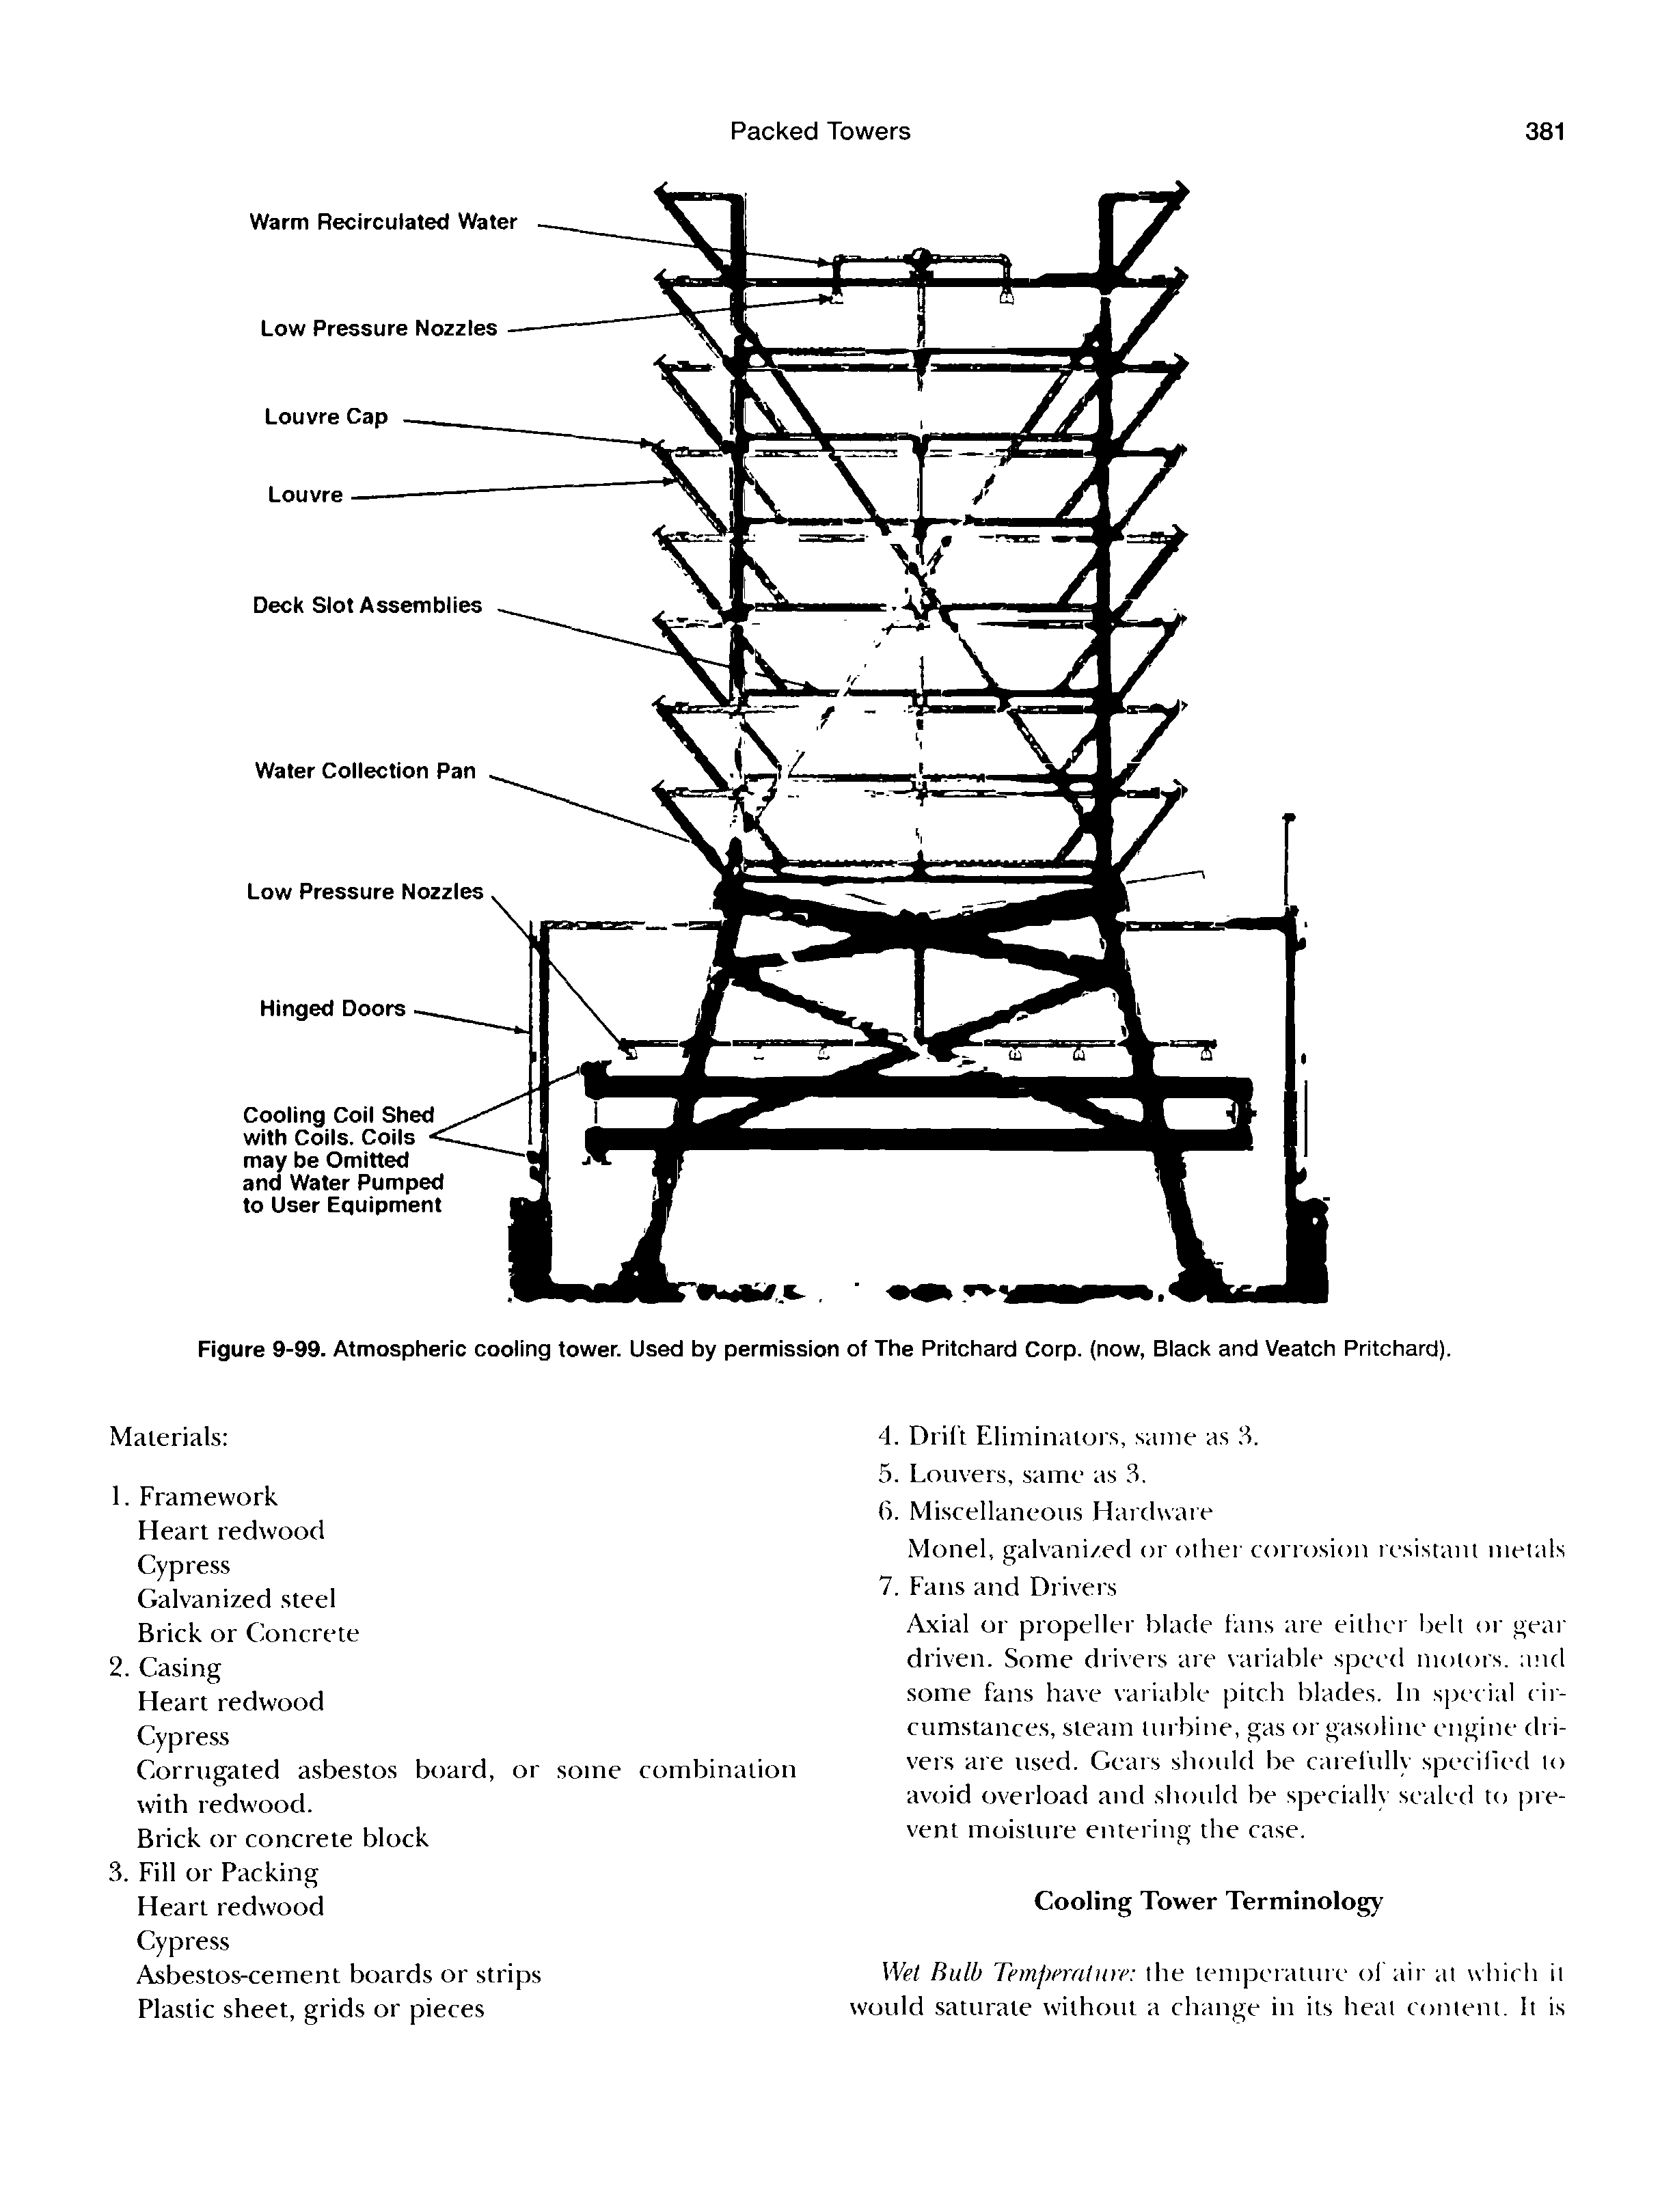 Figure 9-99. Atmospheric cooling tower. Used by permission of The Pritchard Corp. (now, Black and Veatch Pritchard).